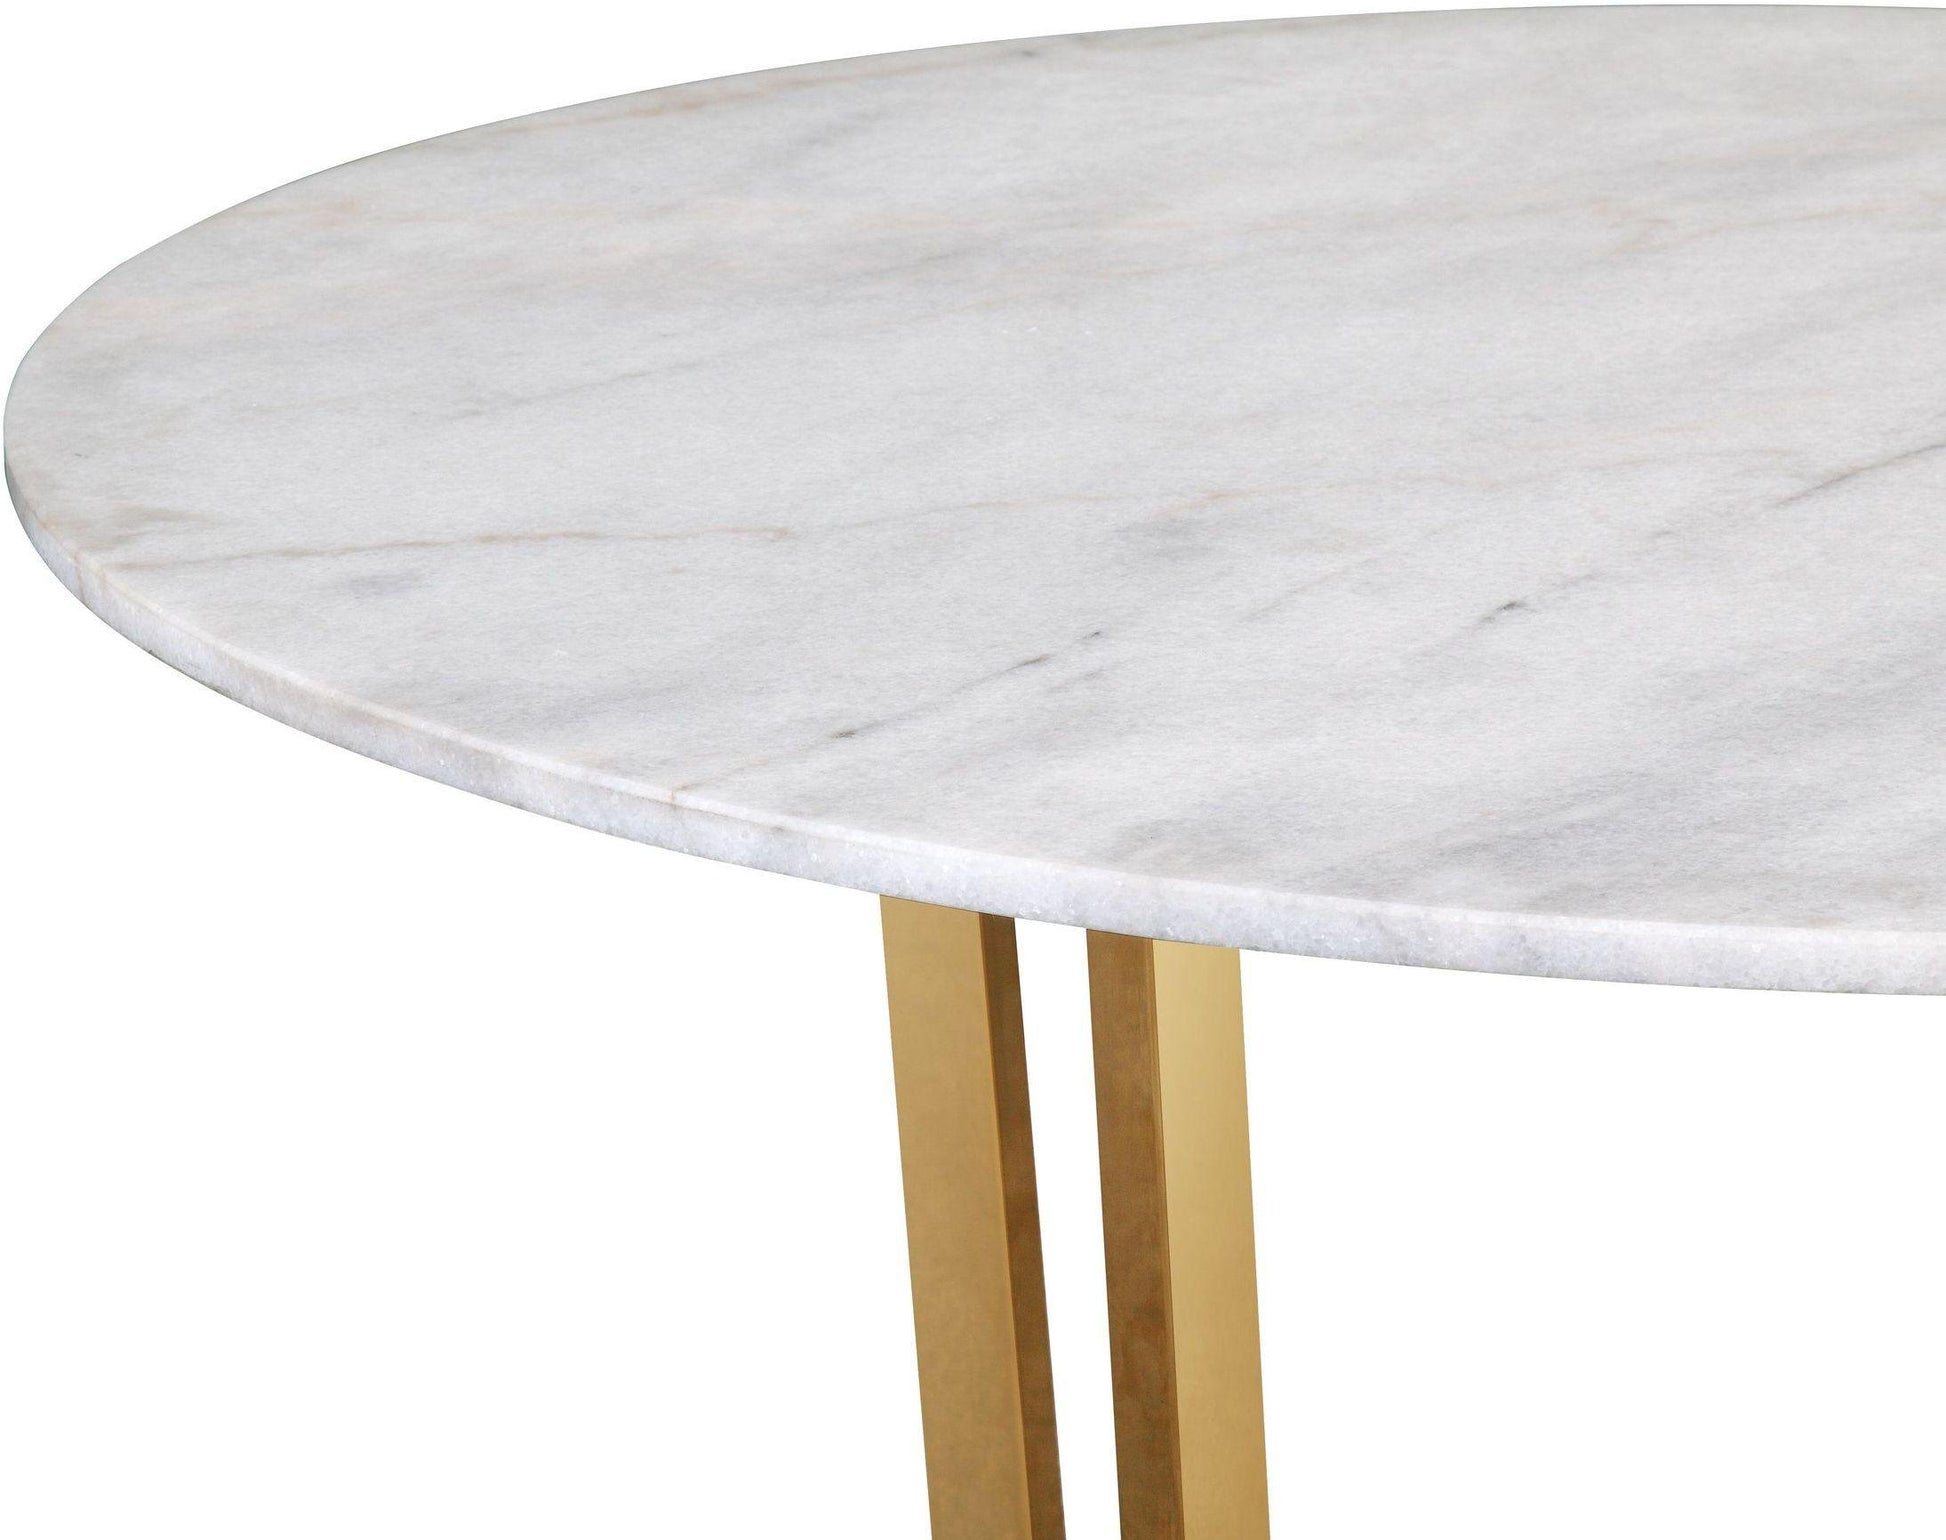 Tov Furniture Maxim White Marble Dining Table